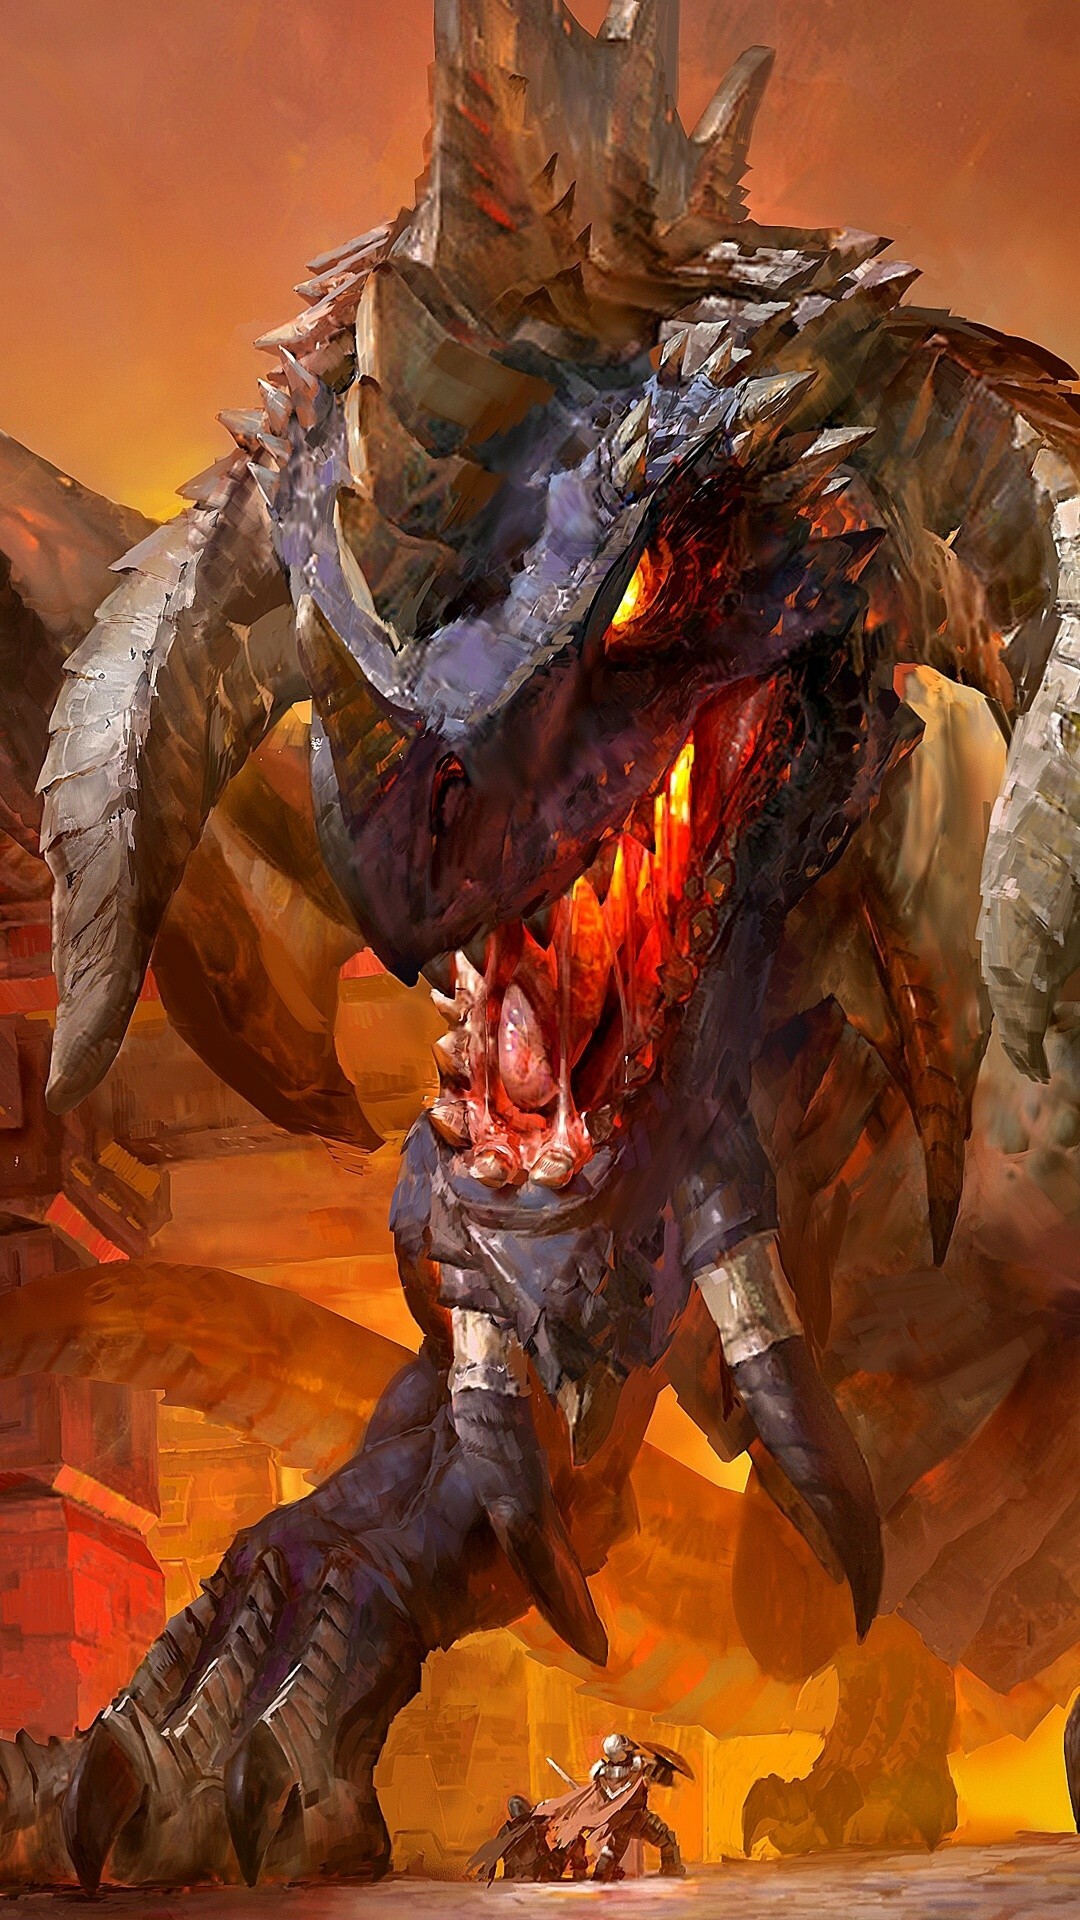 Hearthstone: Nefarian, also known as Blackwing, was the eldest son of Deathwing and his Prime Consort Sintharia, A fantasy video game. 1080x1920 Full HD Background.